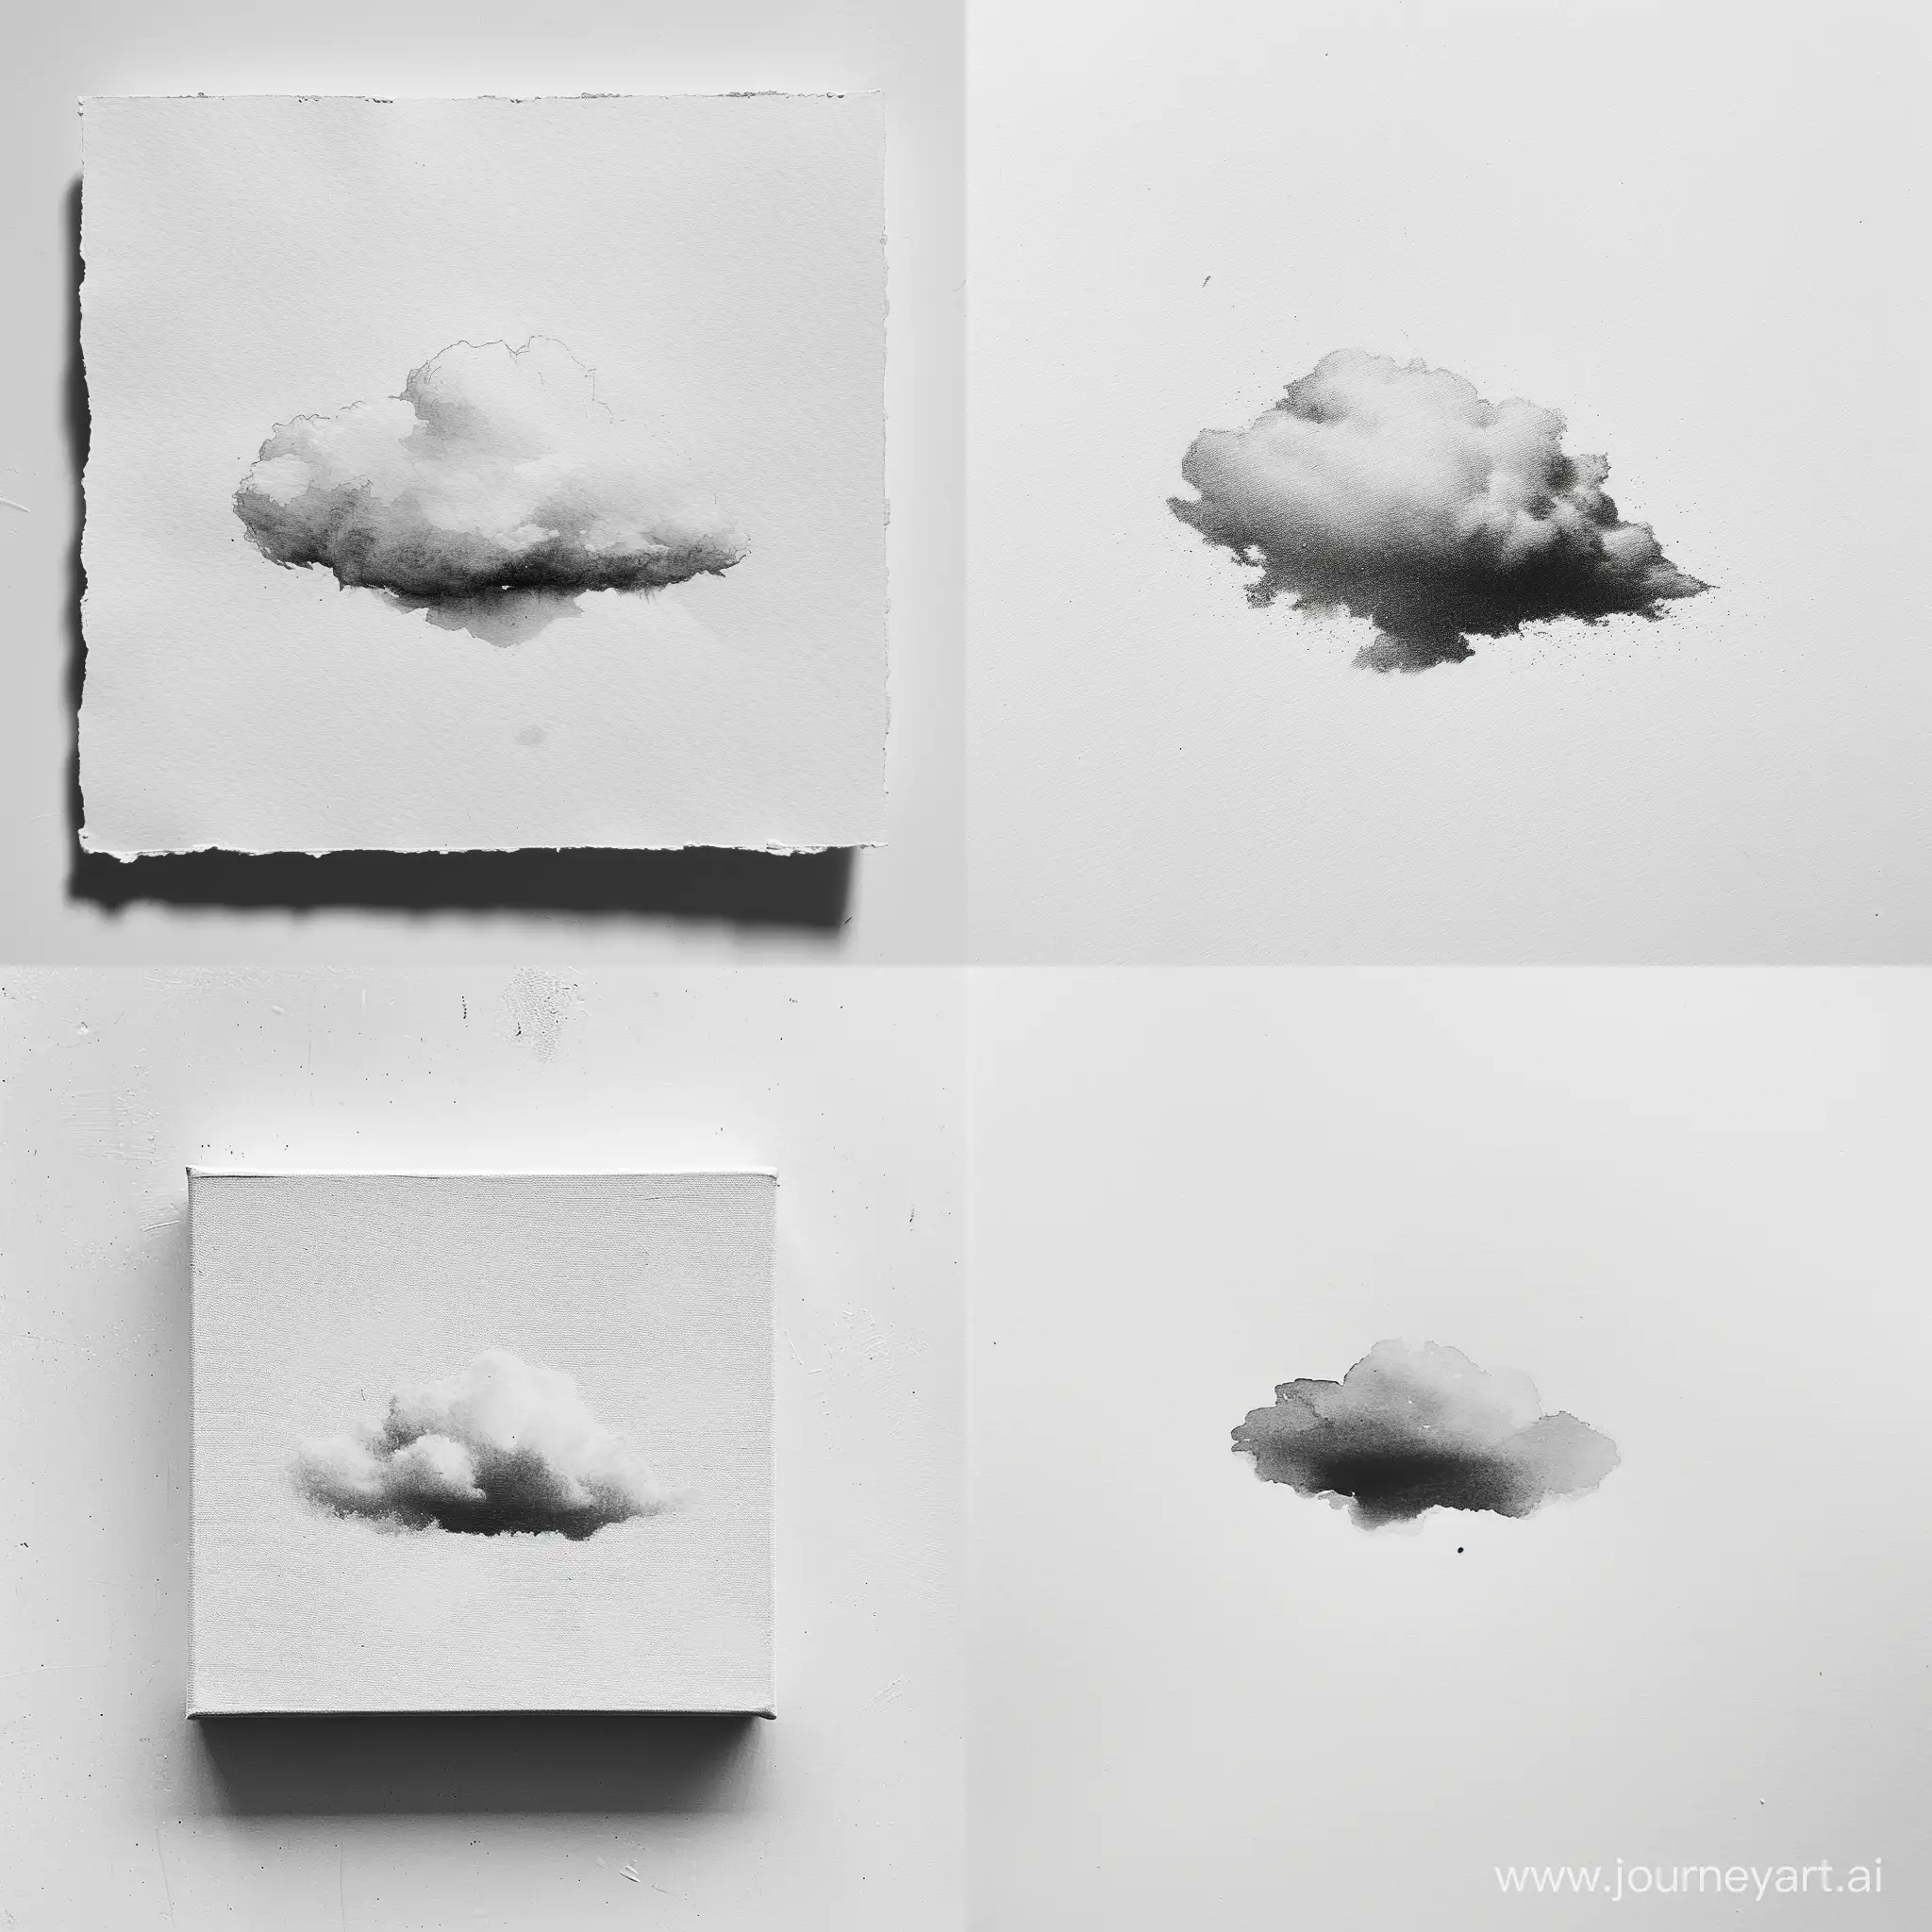 Minimalist-Cloudscape-Single-Cloud-on-White-Canvas-in-MGMT-Style